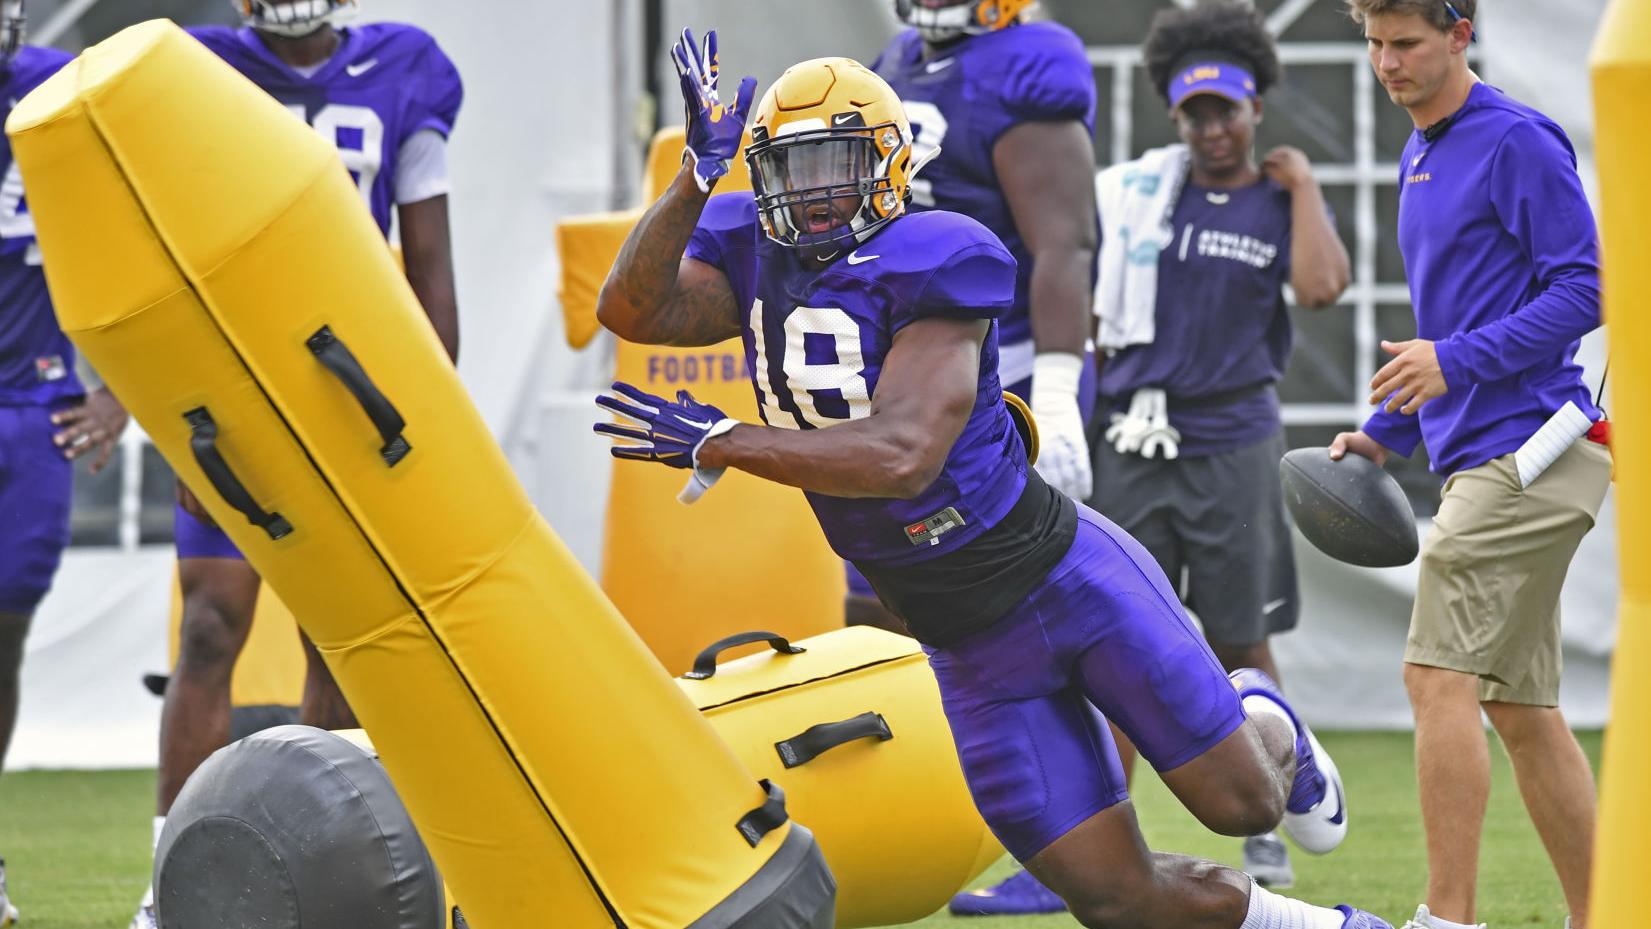 Photos: K'Lavon Chaisson returns to practice Thursday for the Tigers